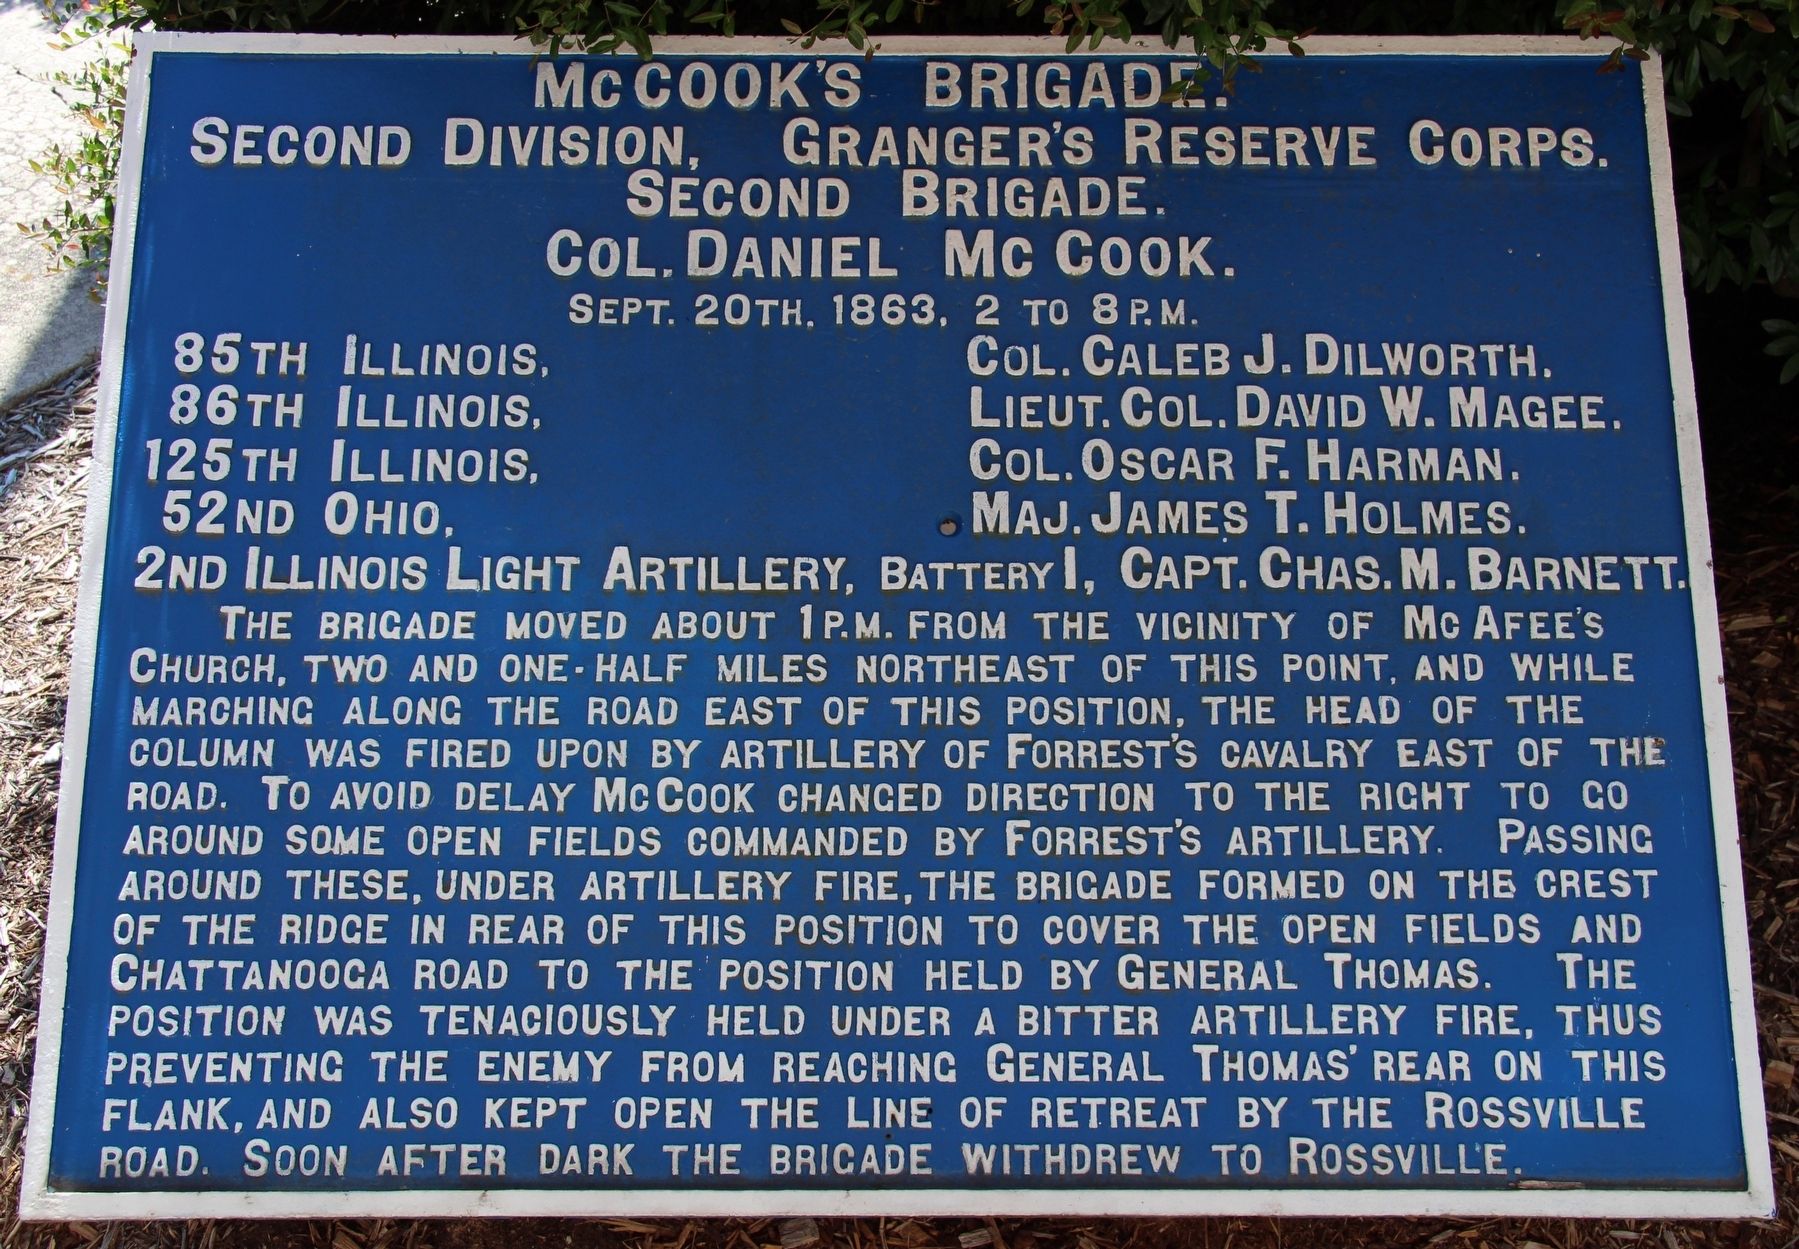 McCook's Brigade Marker image. Click for full size.